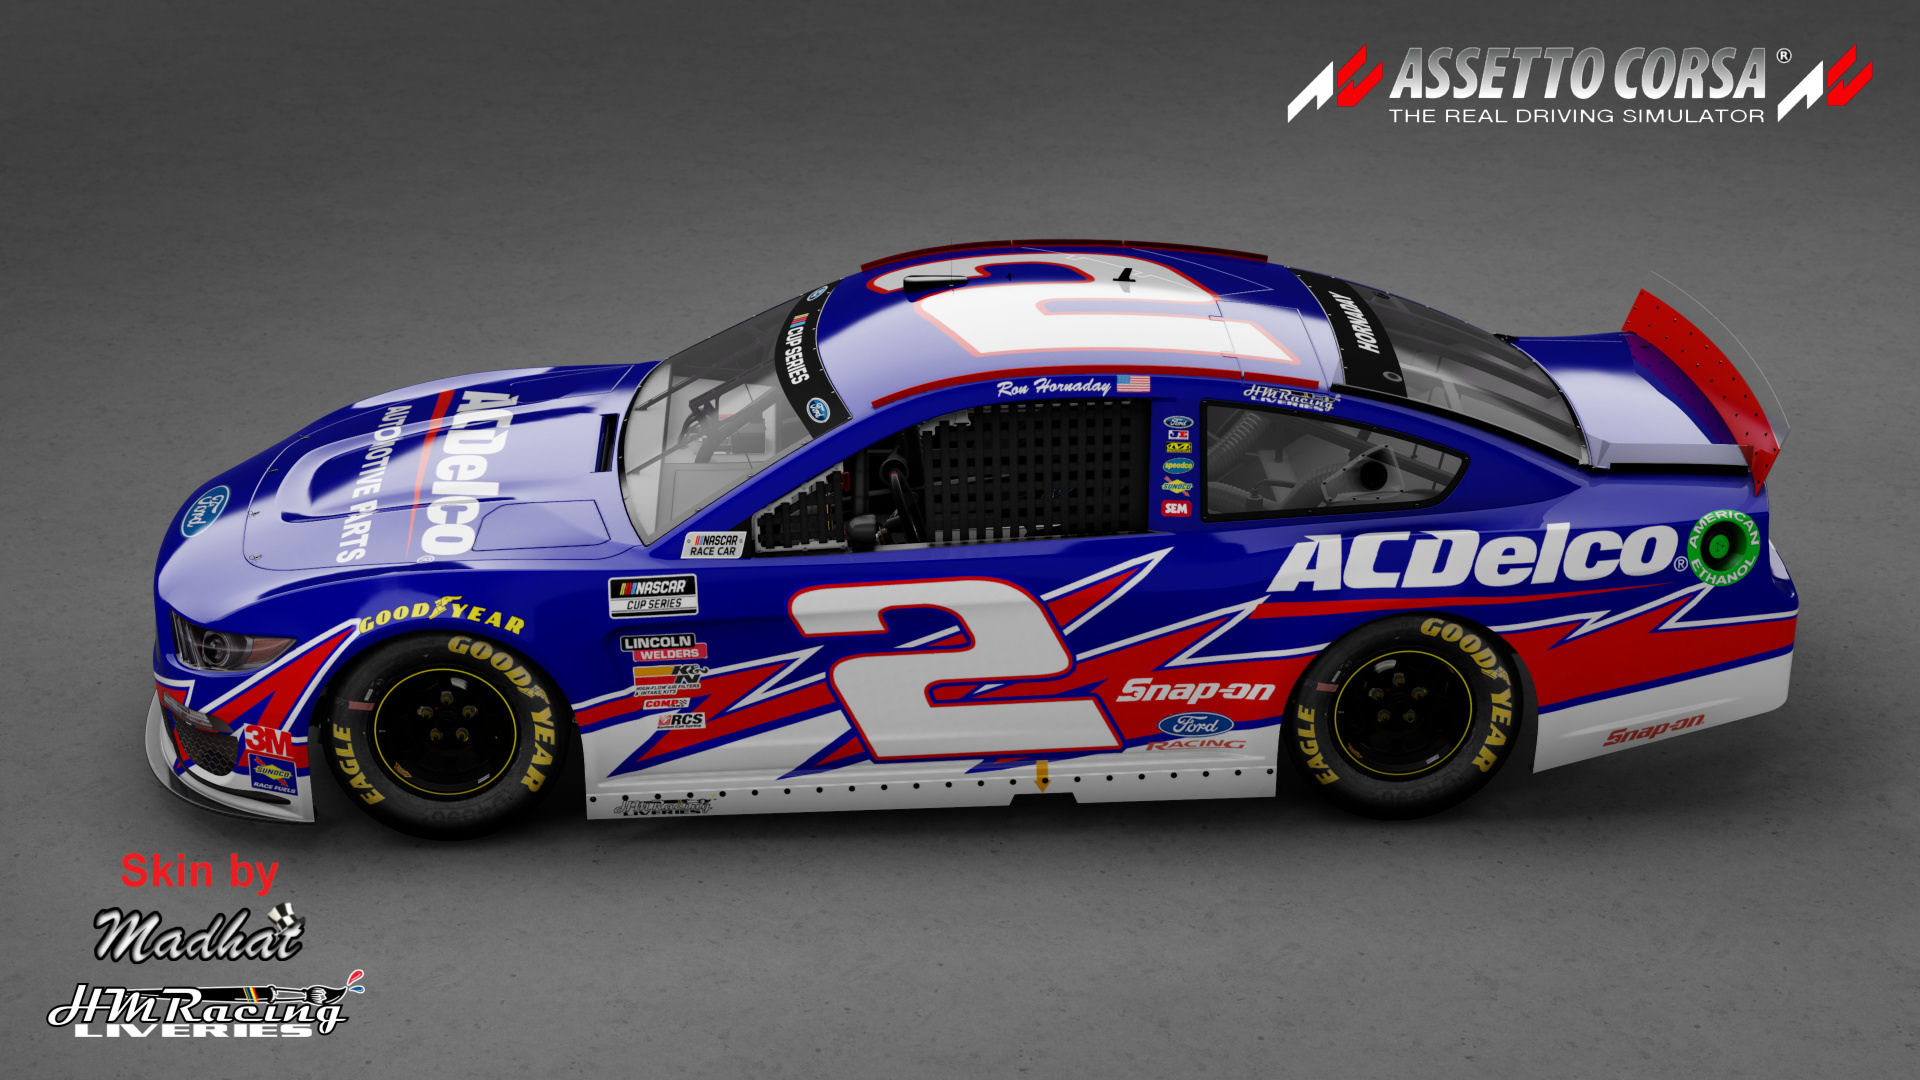 Ron Hornaday No2 ACDelco Mustang Nascar by Madhat HMRacing Liveries 03.jpg